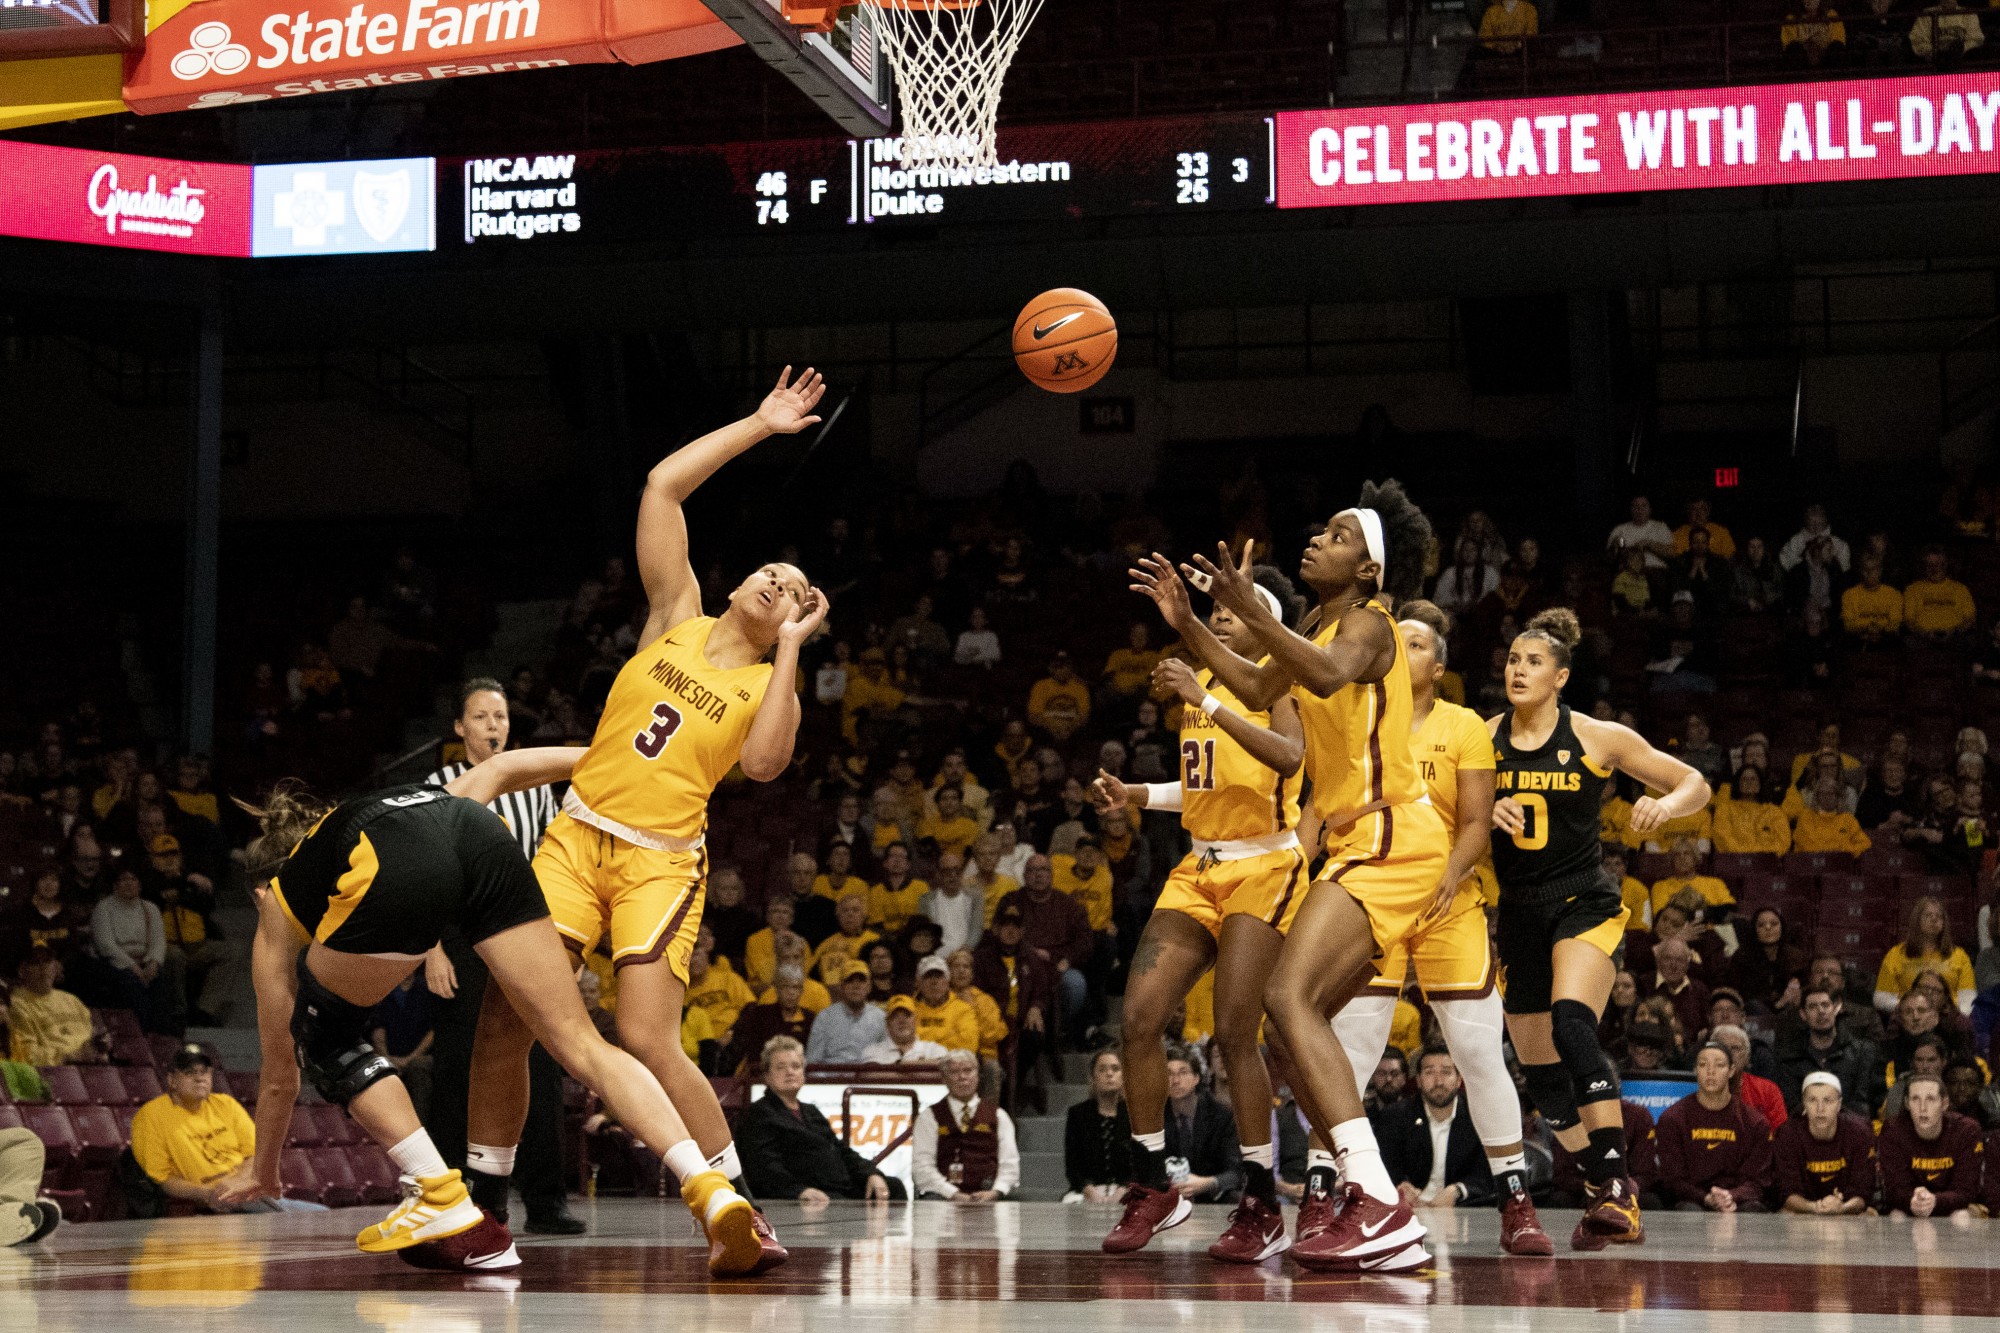 The Gophers look to recover a rebound during the game against Arizona State at Williams Arena on Sunday, Nov. 17. The Gophers defeated the Sun Devils 80-66. 
